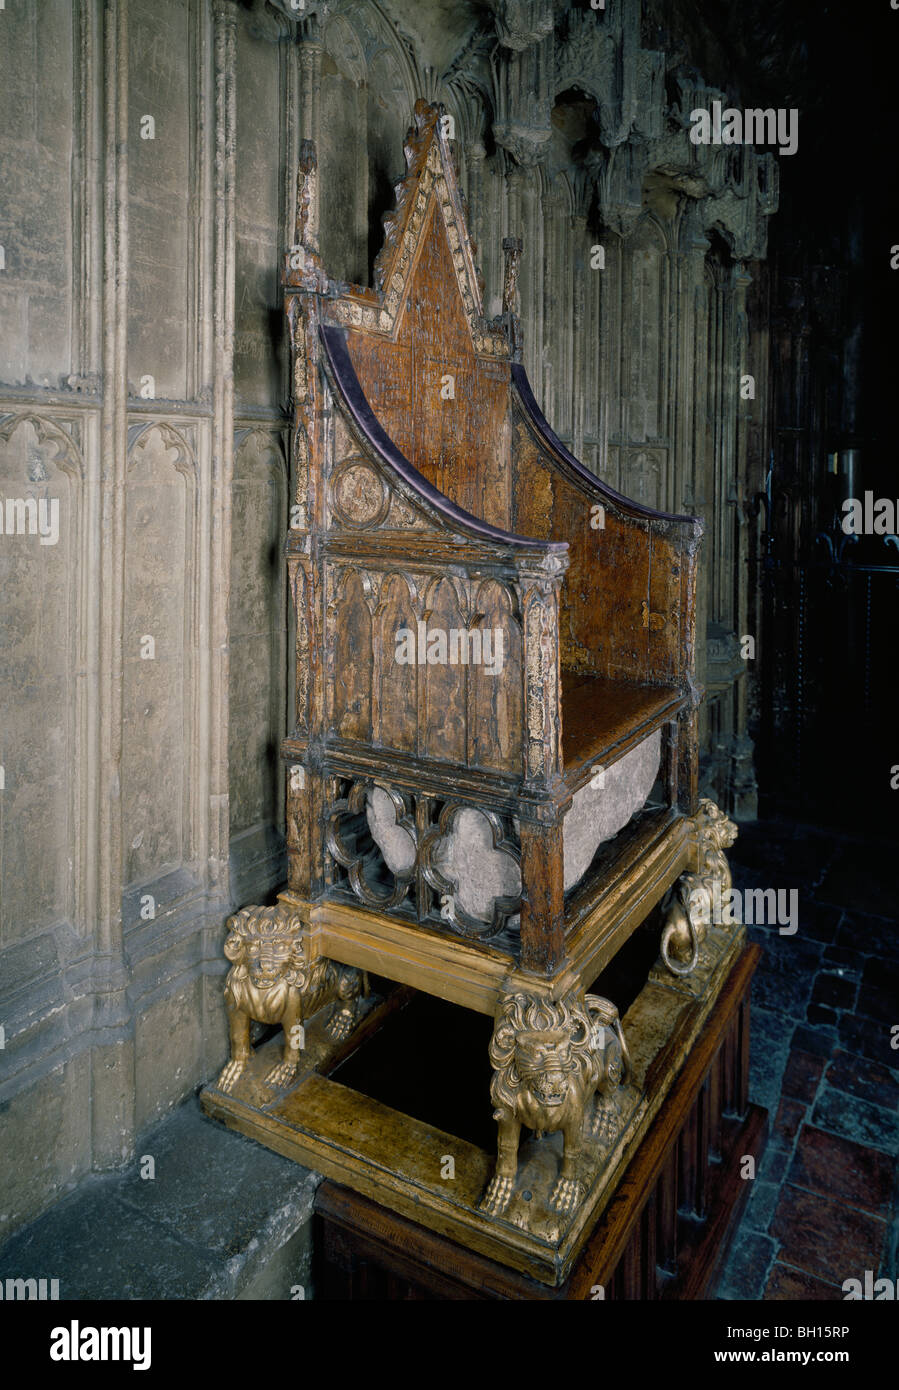 Coronation Throne made for Edward I to contain the Stone of Scone. Westminster Abbey, London England Stock Photo